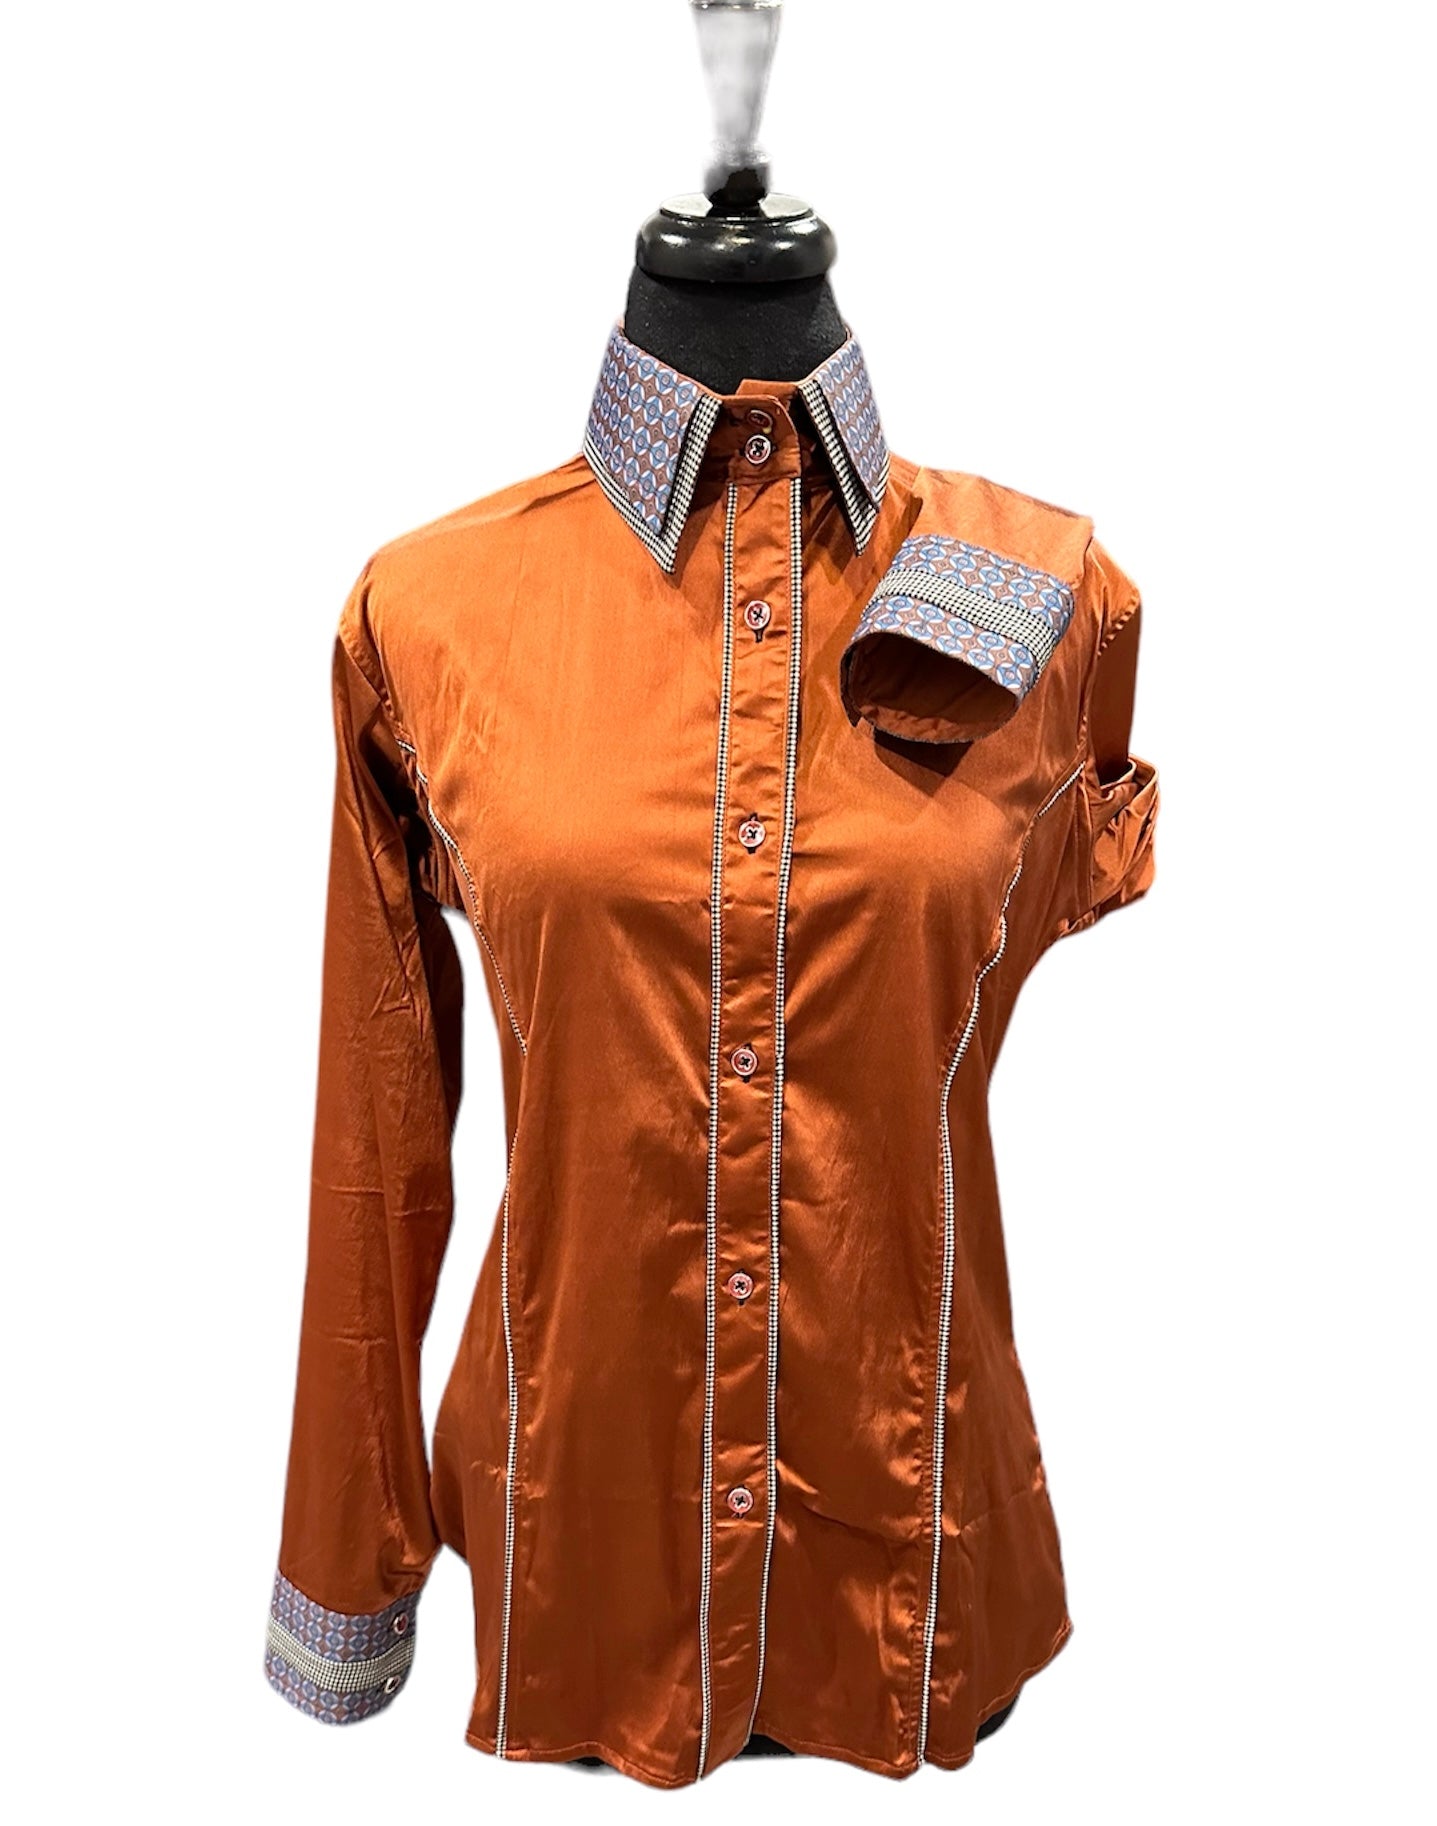 Stretch Satin Western Shirt Rust with Plaid and Print Design